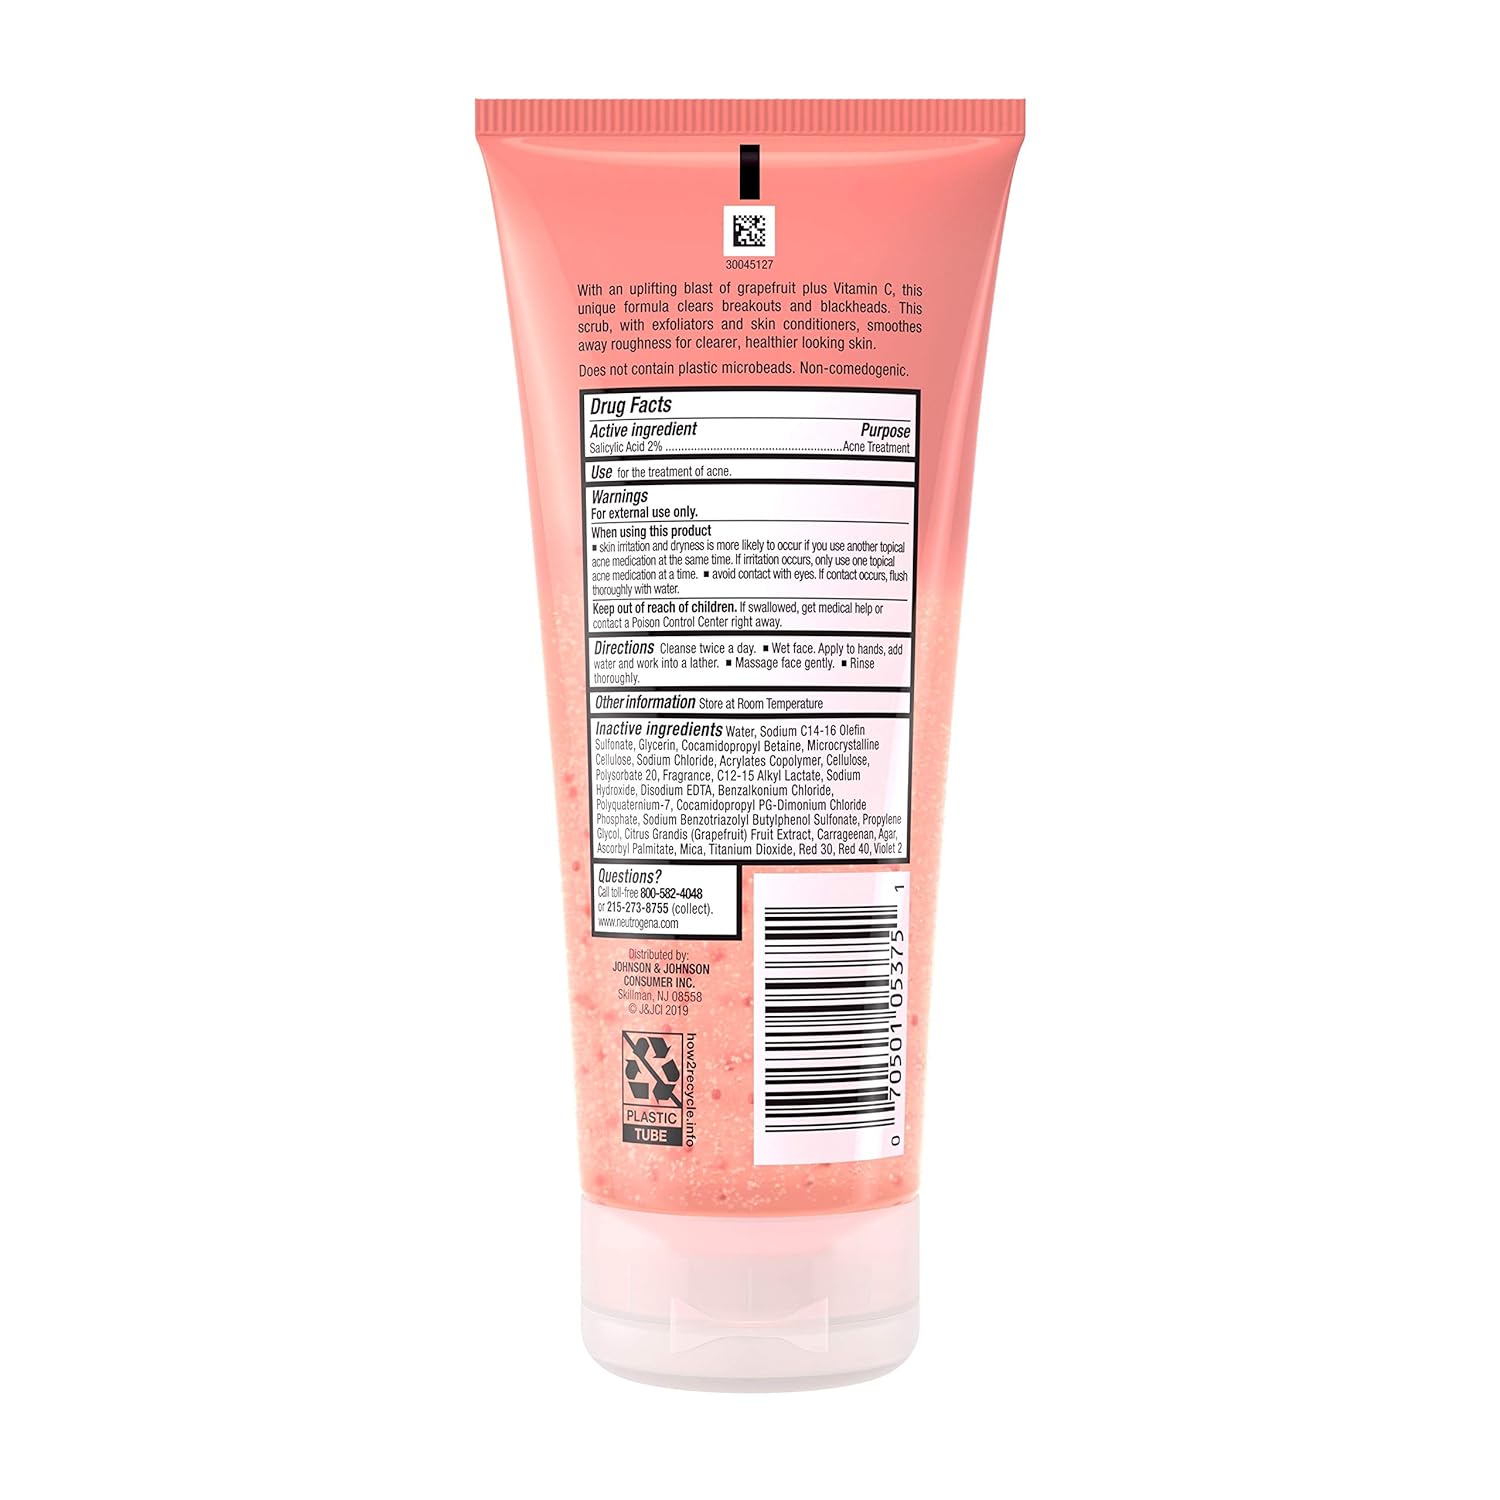 Neutrogena Oil Free Pink Grapefruit Acne Treatment Face Wash with Vitamin C, 2% Salicylic Acid, Gentle Foaming Facial Scrub to Treat & Prevent Breakouts, 6.7 Fl Oz, Pack of 3